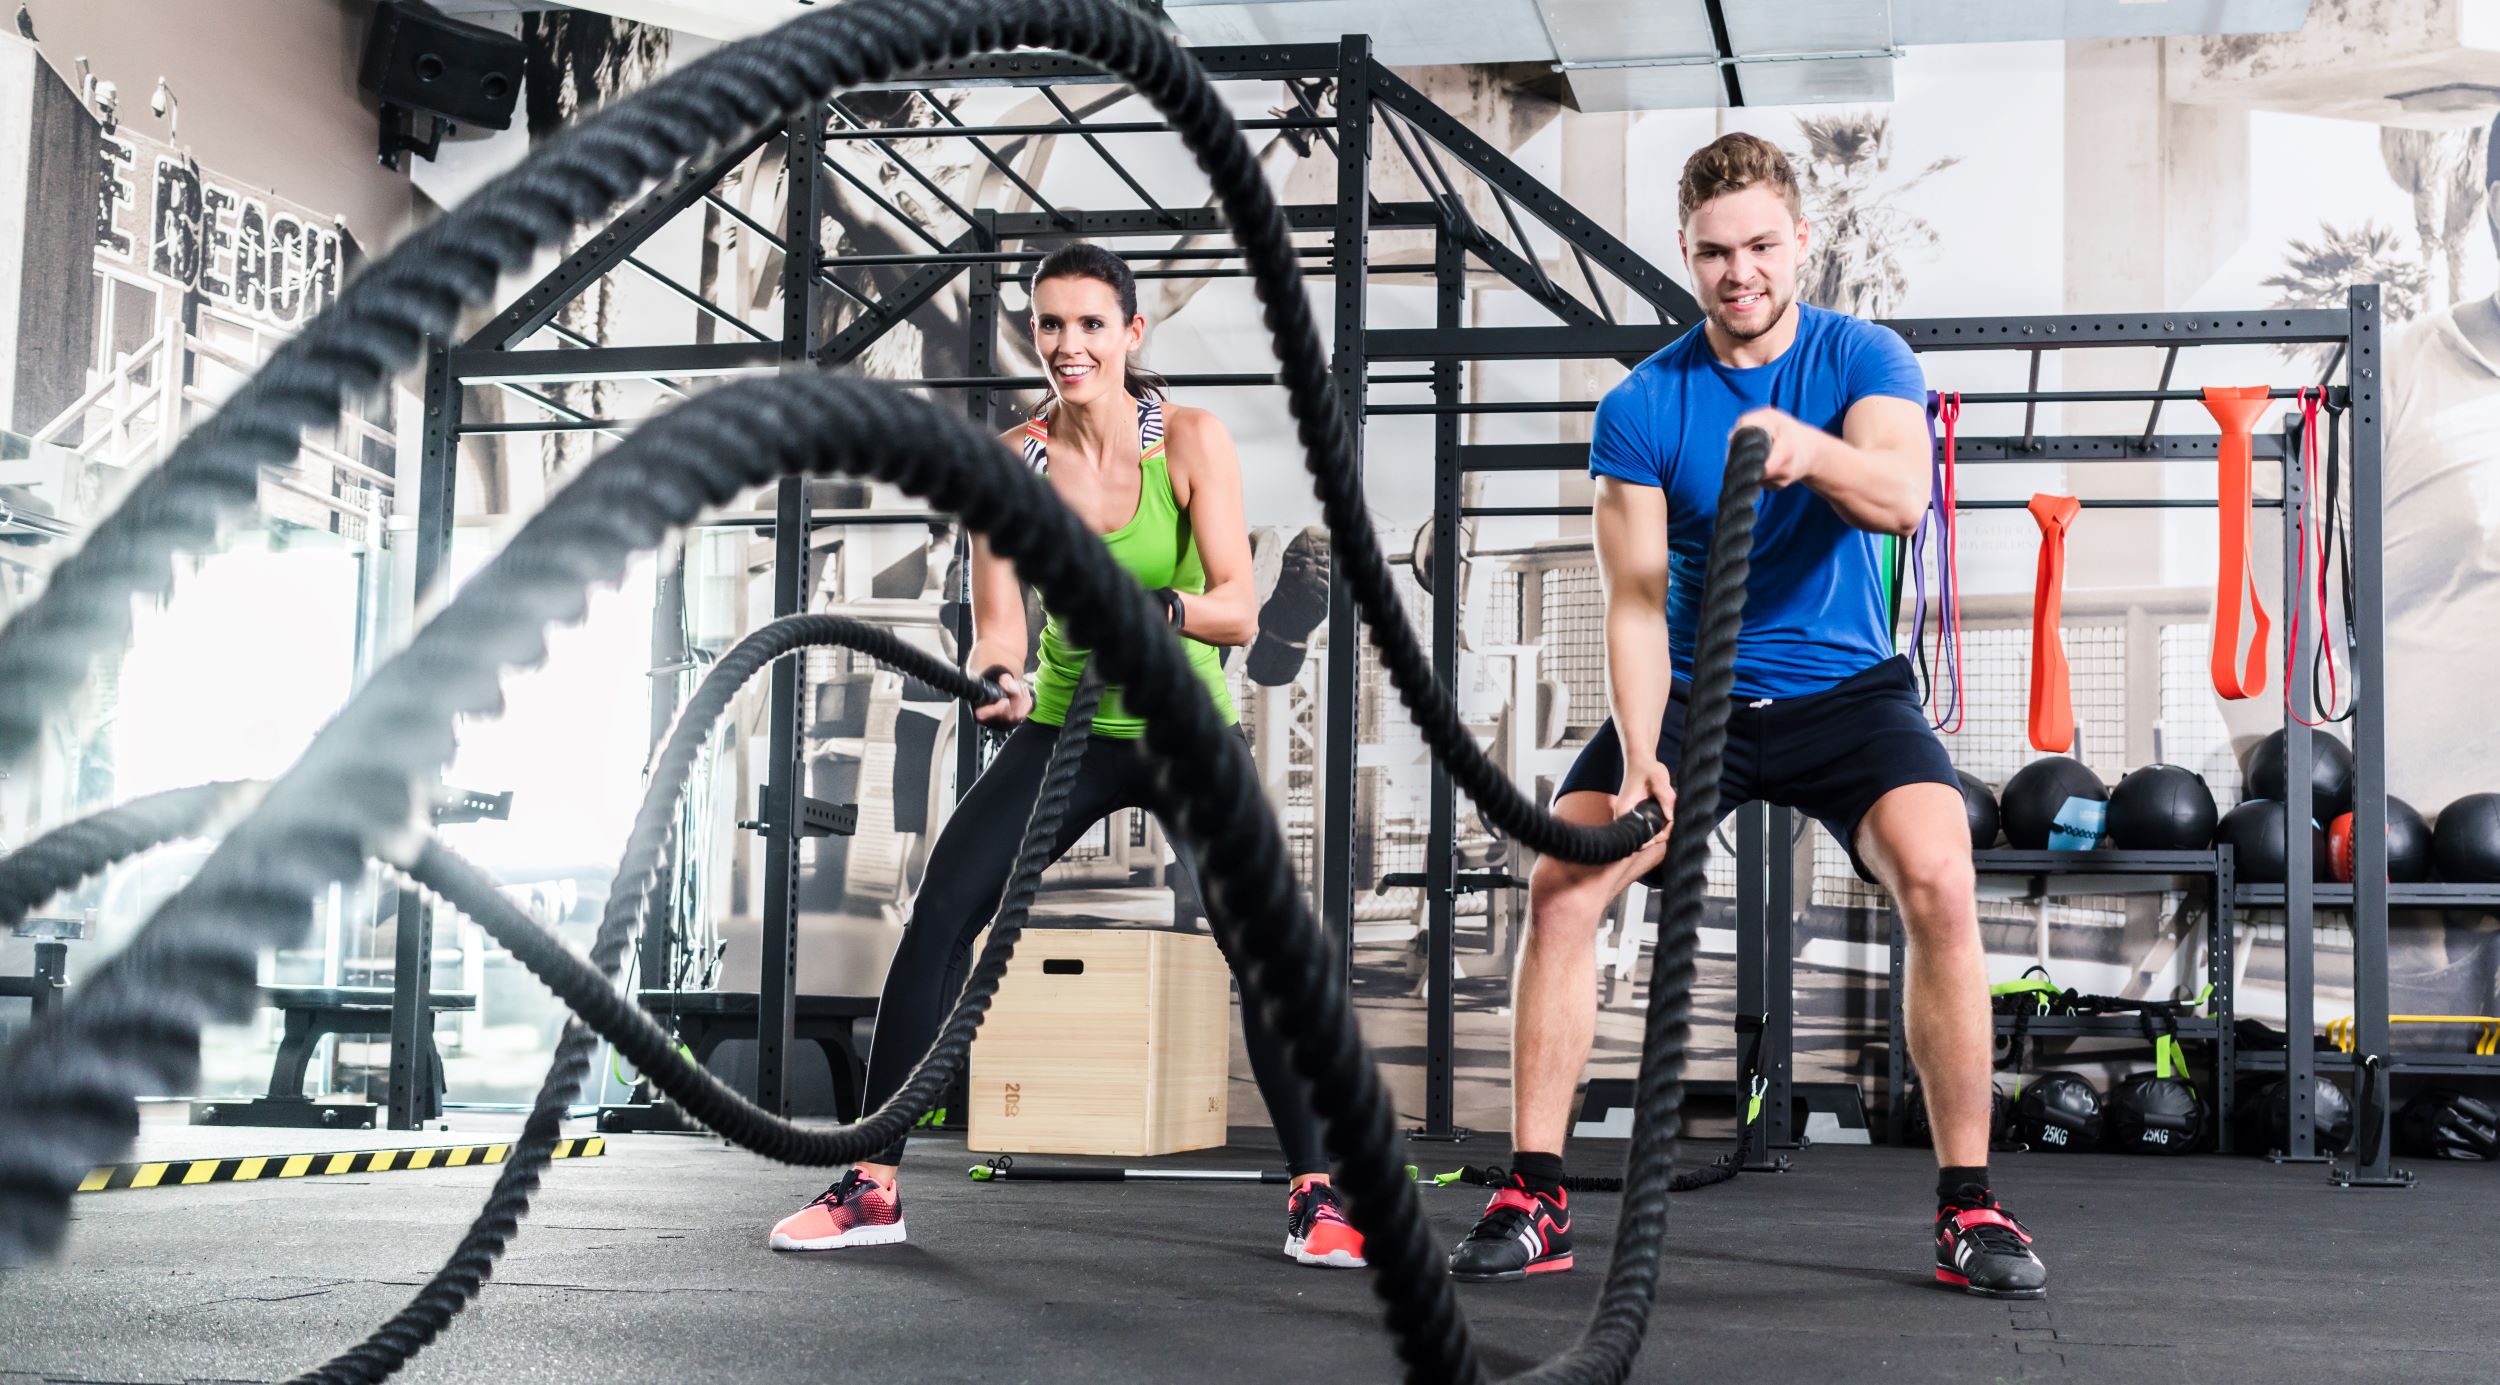 Two people exercising in a gym, one using battle ropes and the other using resistance bands.